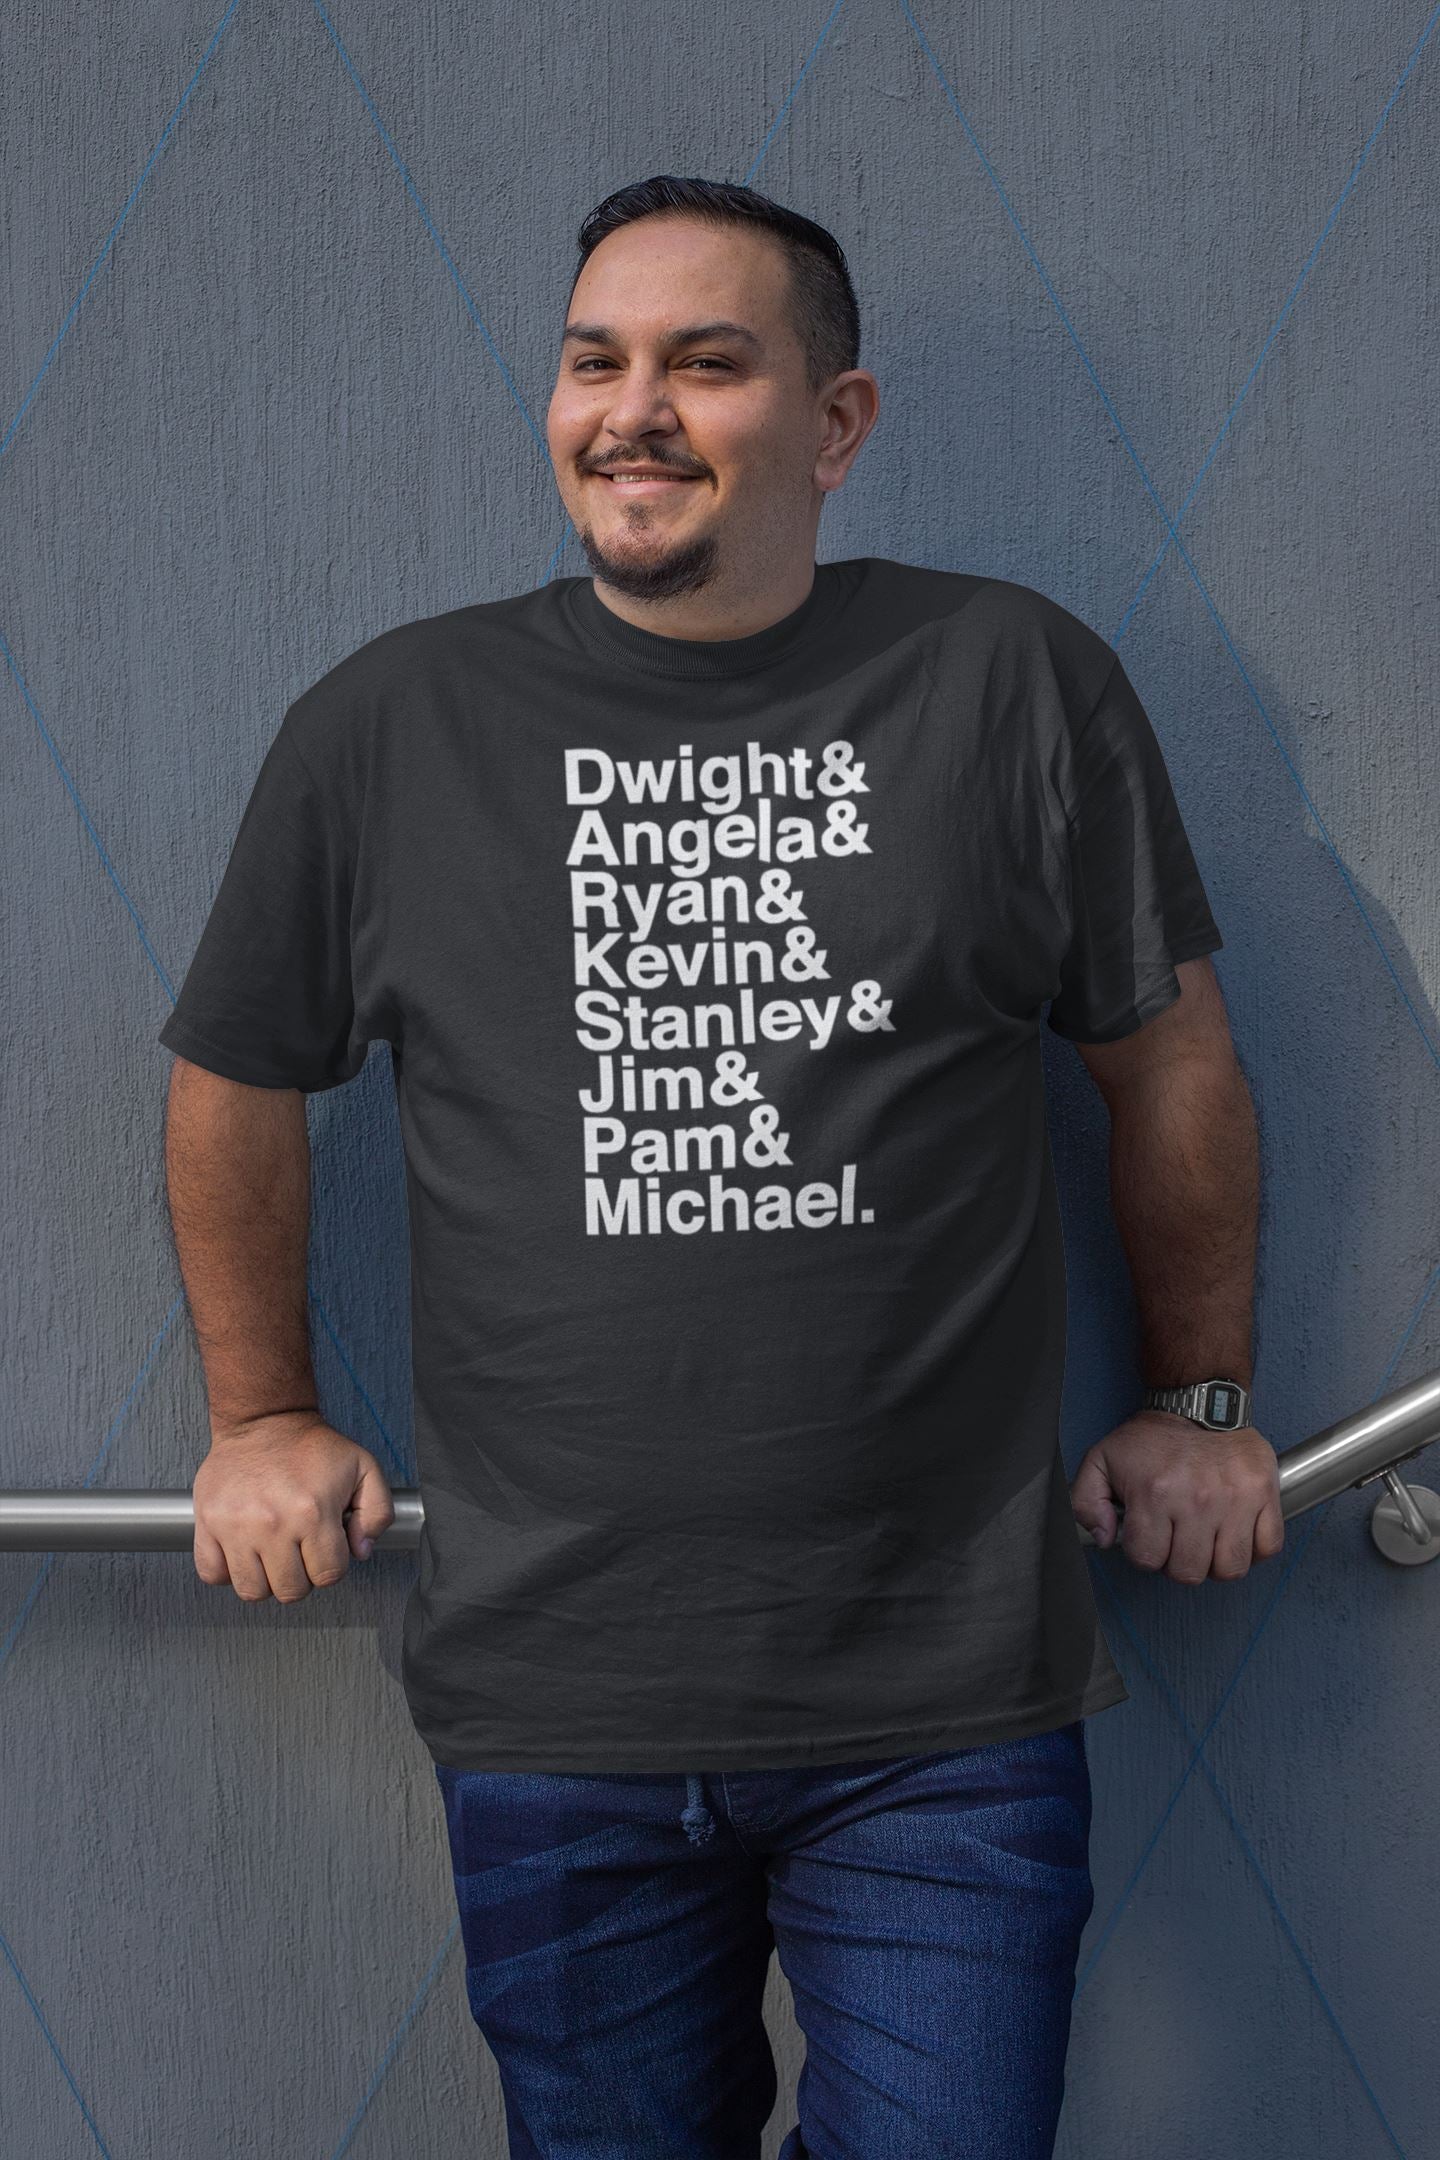 The Full Office Cast Names Official Black T Shirt for Men and Women freeshipping - Catch My Drift India